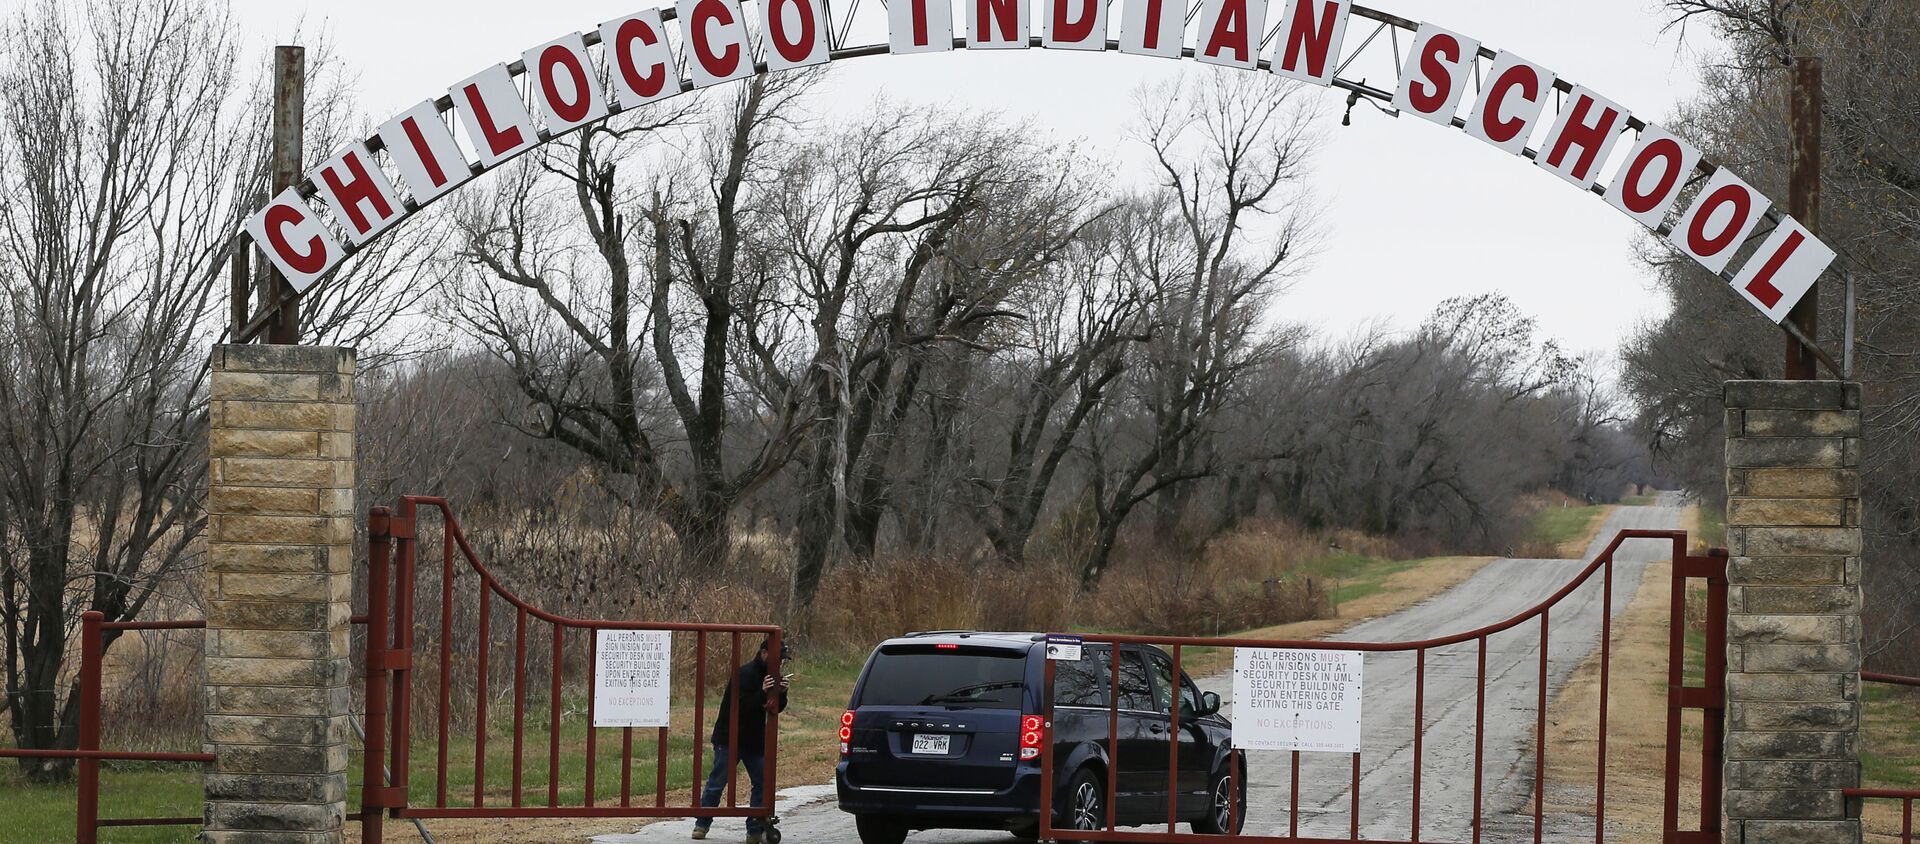 In this Wednesday, Nov. 29, 2017 file photo, a vehicle arrives at the abandoned Chilocco Indian School campus in Newkirk, Okla, Five American Indian tribes are opposing plans by the U.S. Department of Homeland Security to conduct bioterrorism drills at a tribal burial ground and abandoned boarding school, saying the agency didn't tell them that potentially dangerous substances could be used there. - Sputnik International, 1920, 22.06.2021